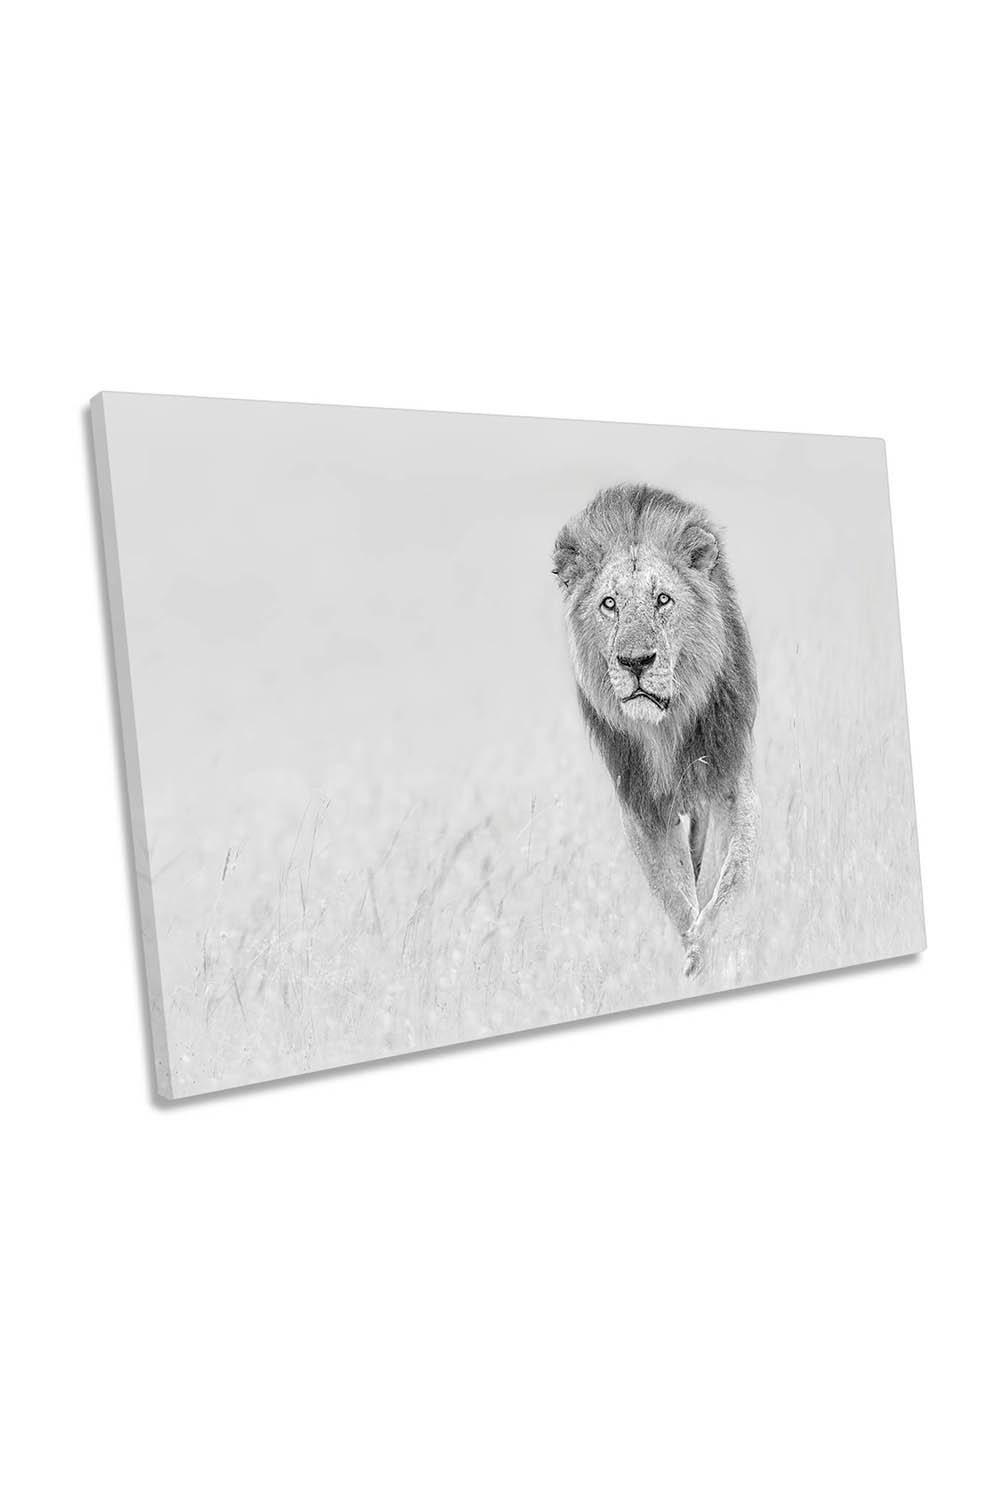 The King of The Prairie Lion Canvas Wall Art Picture Print